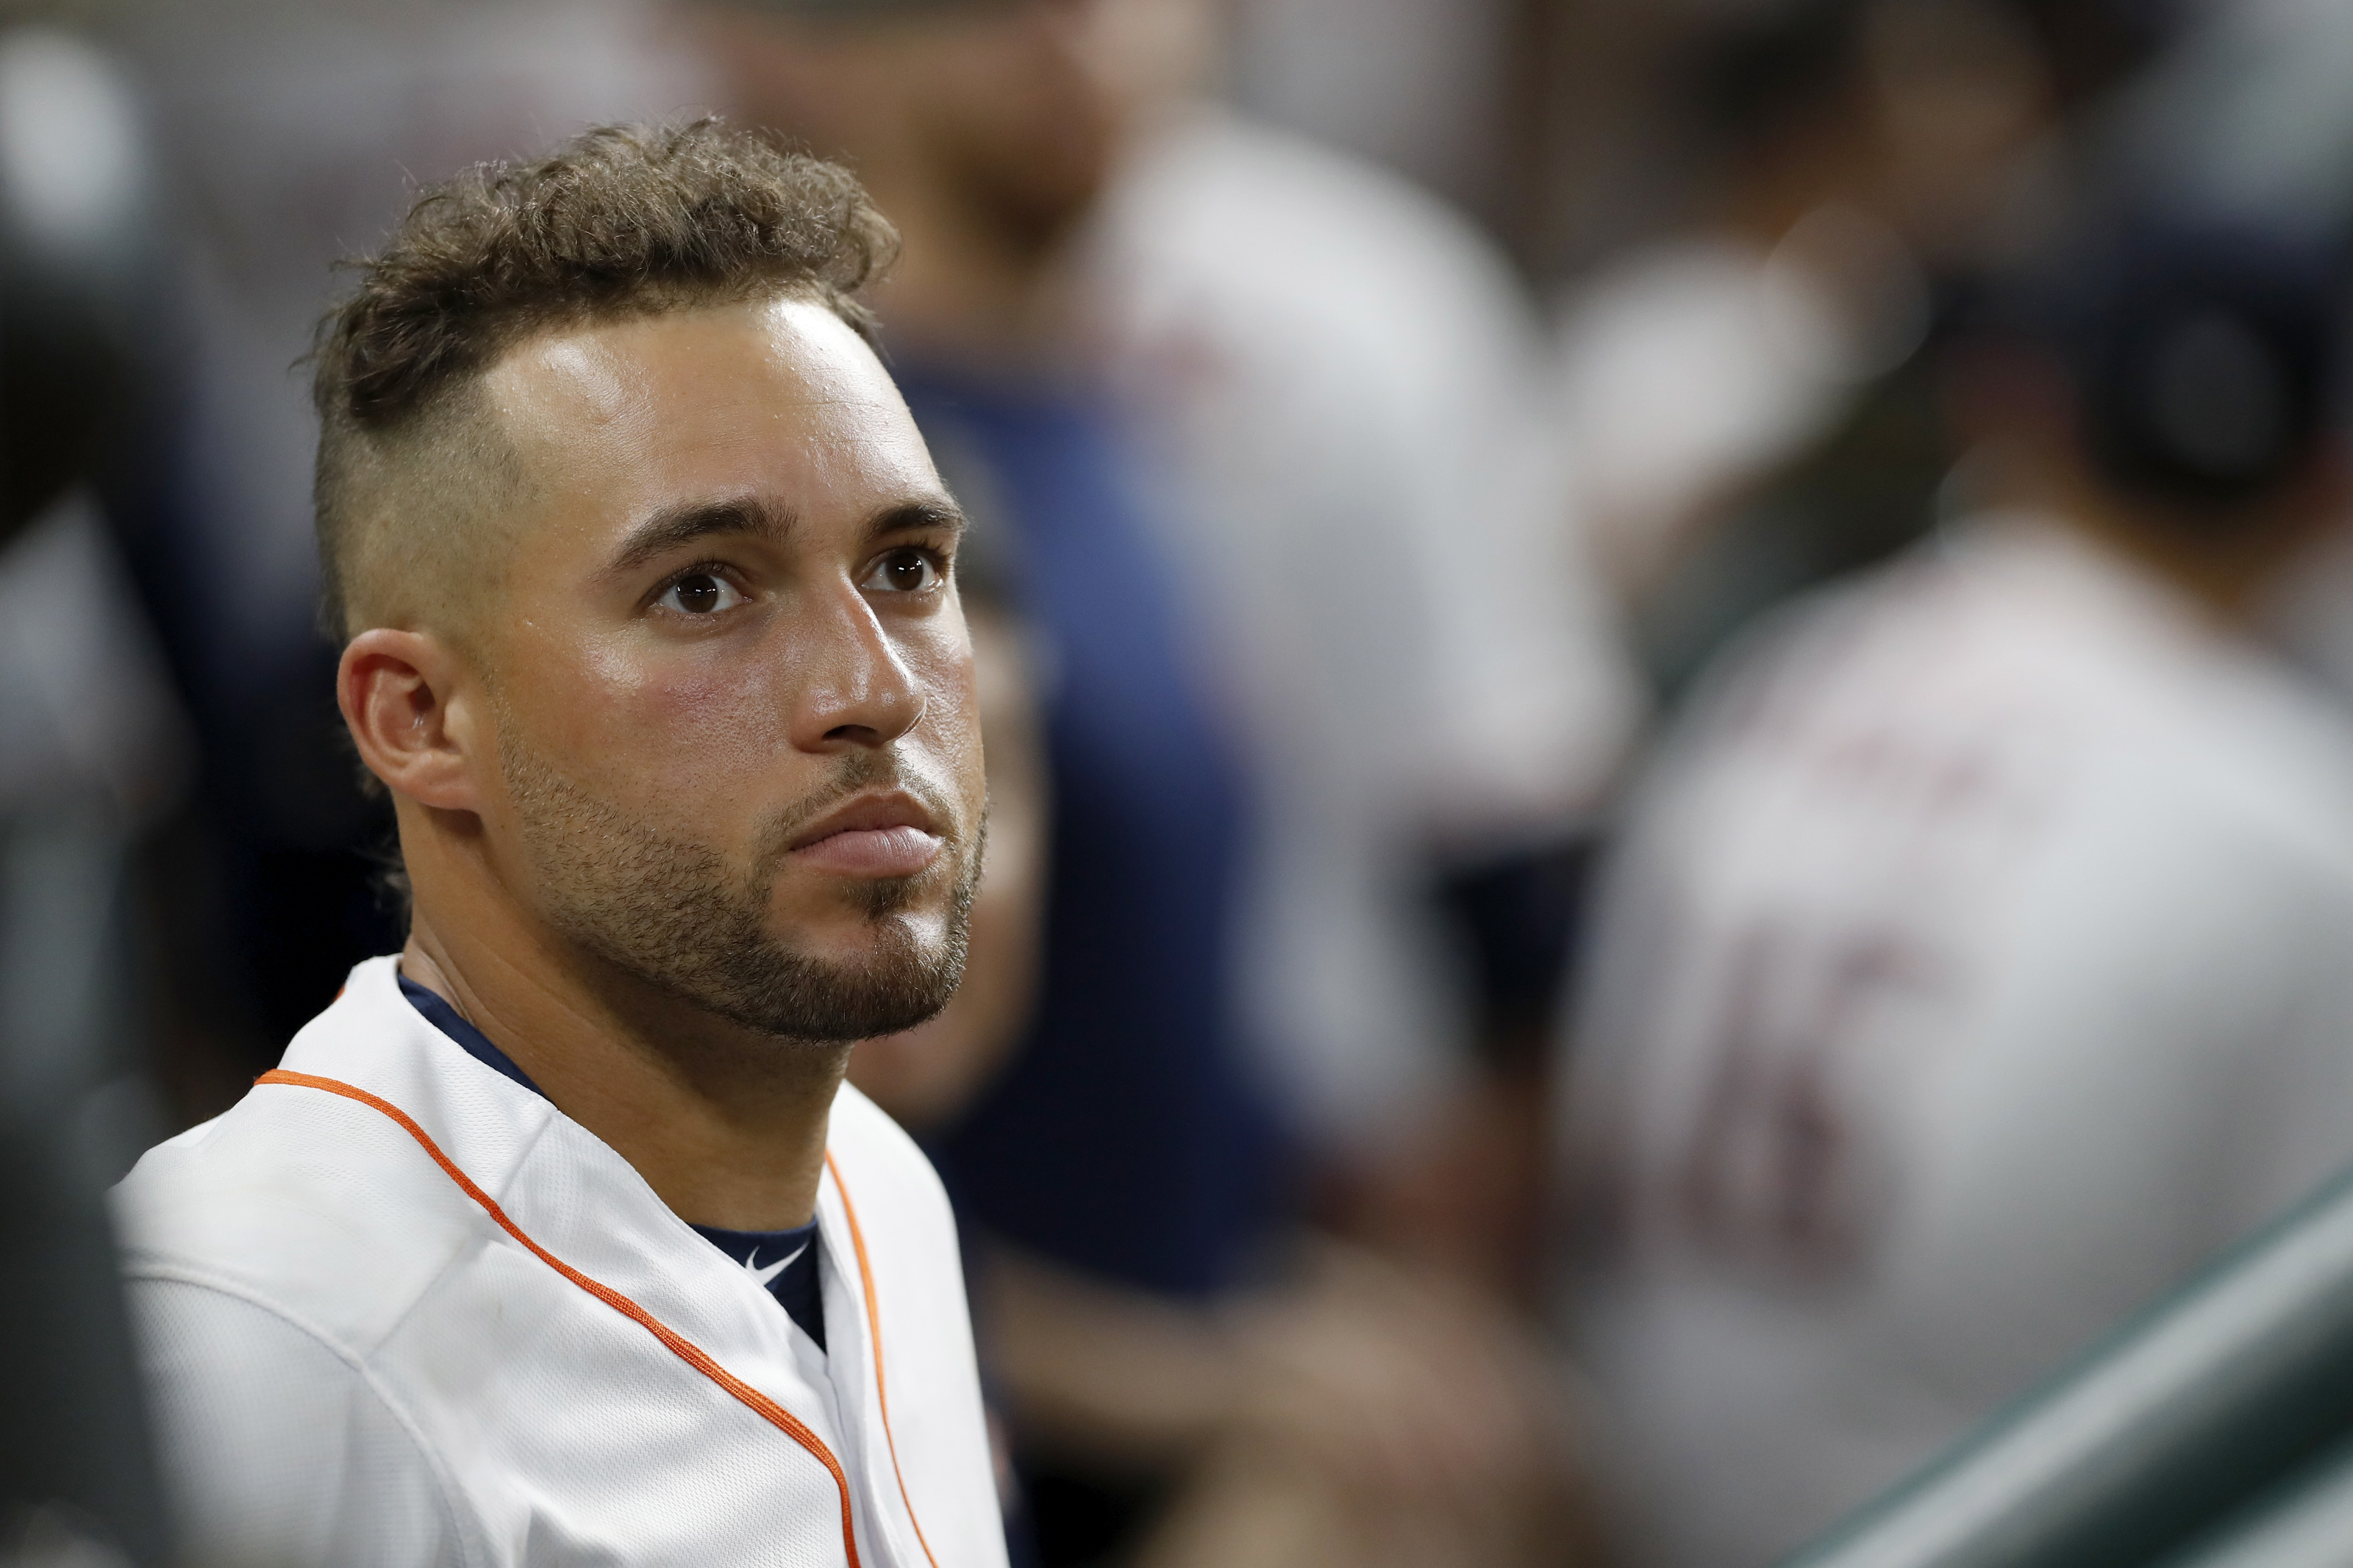 hairstyle george springer haircut